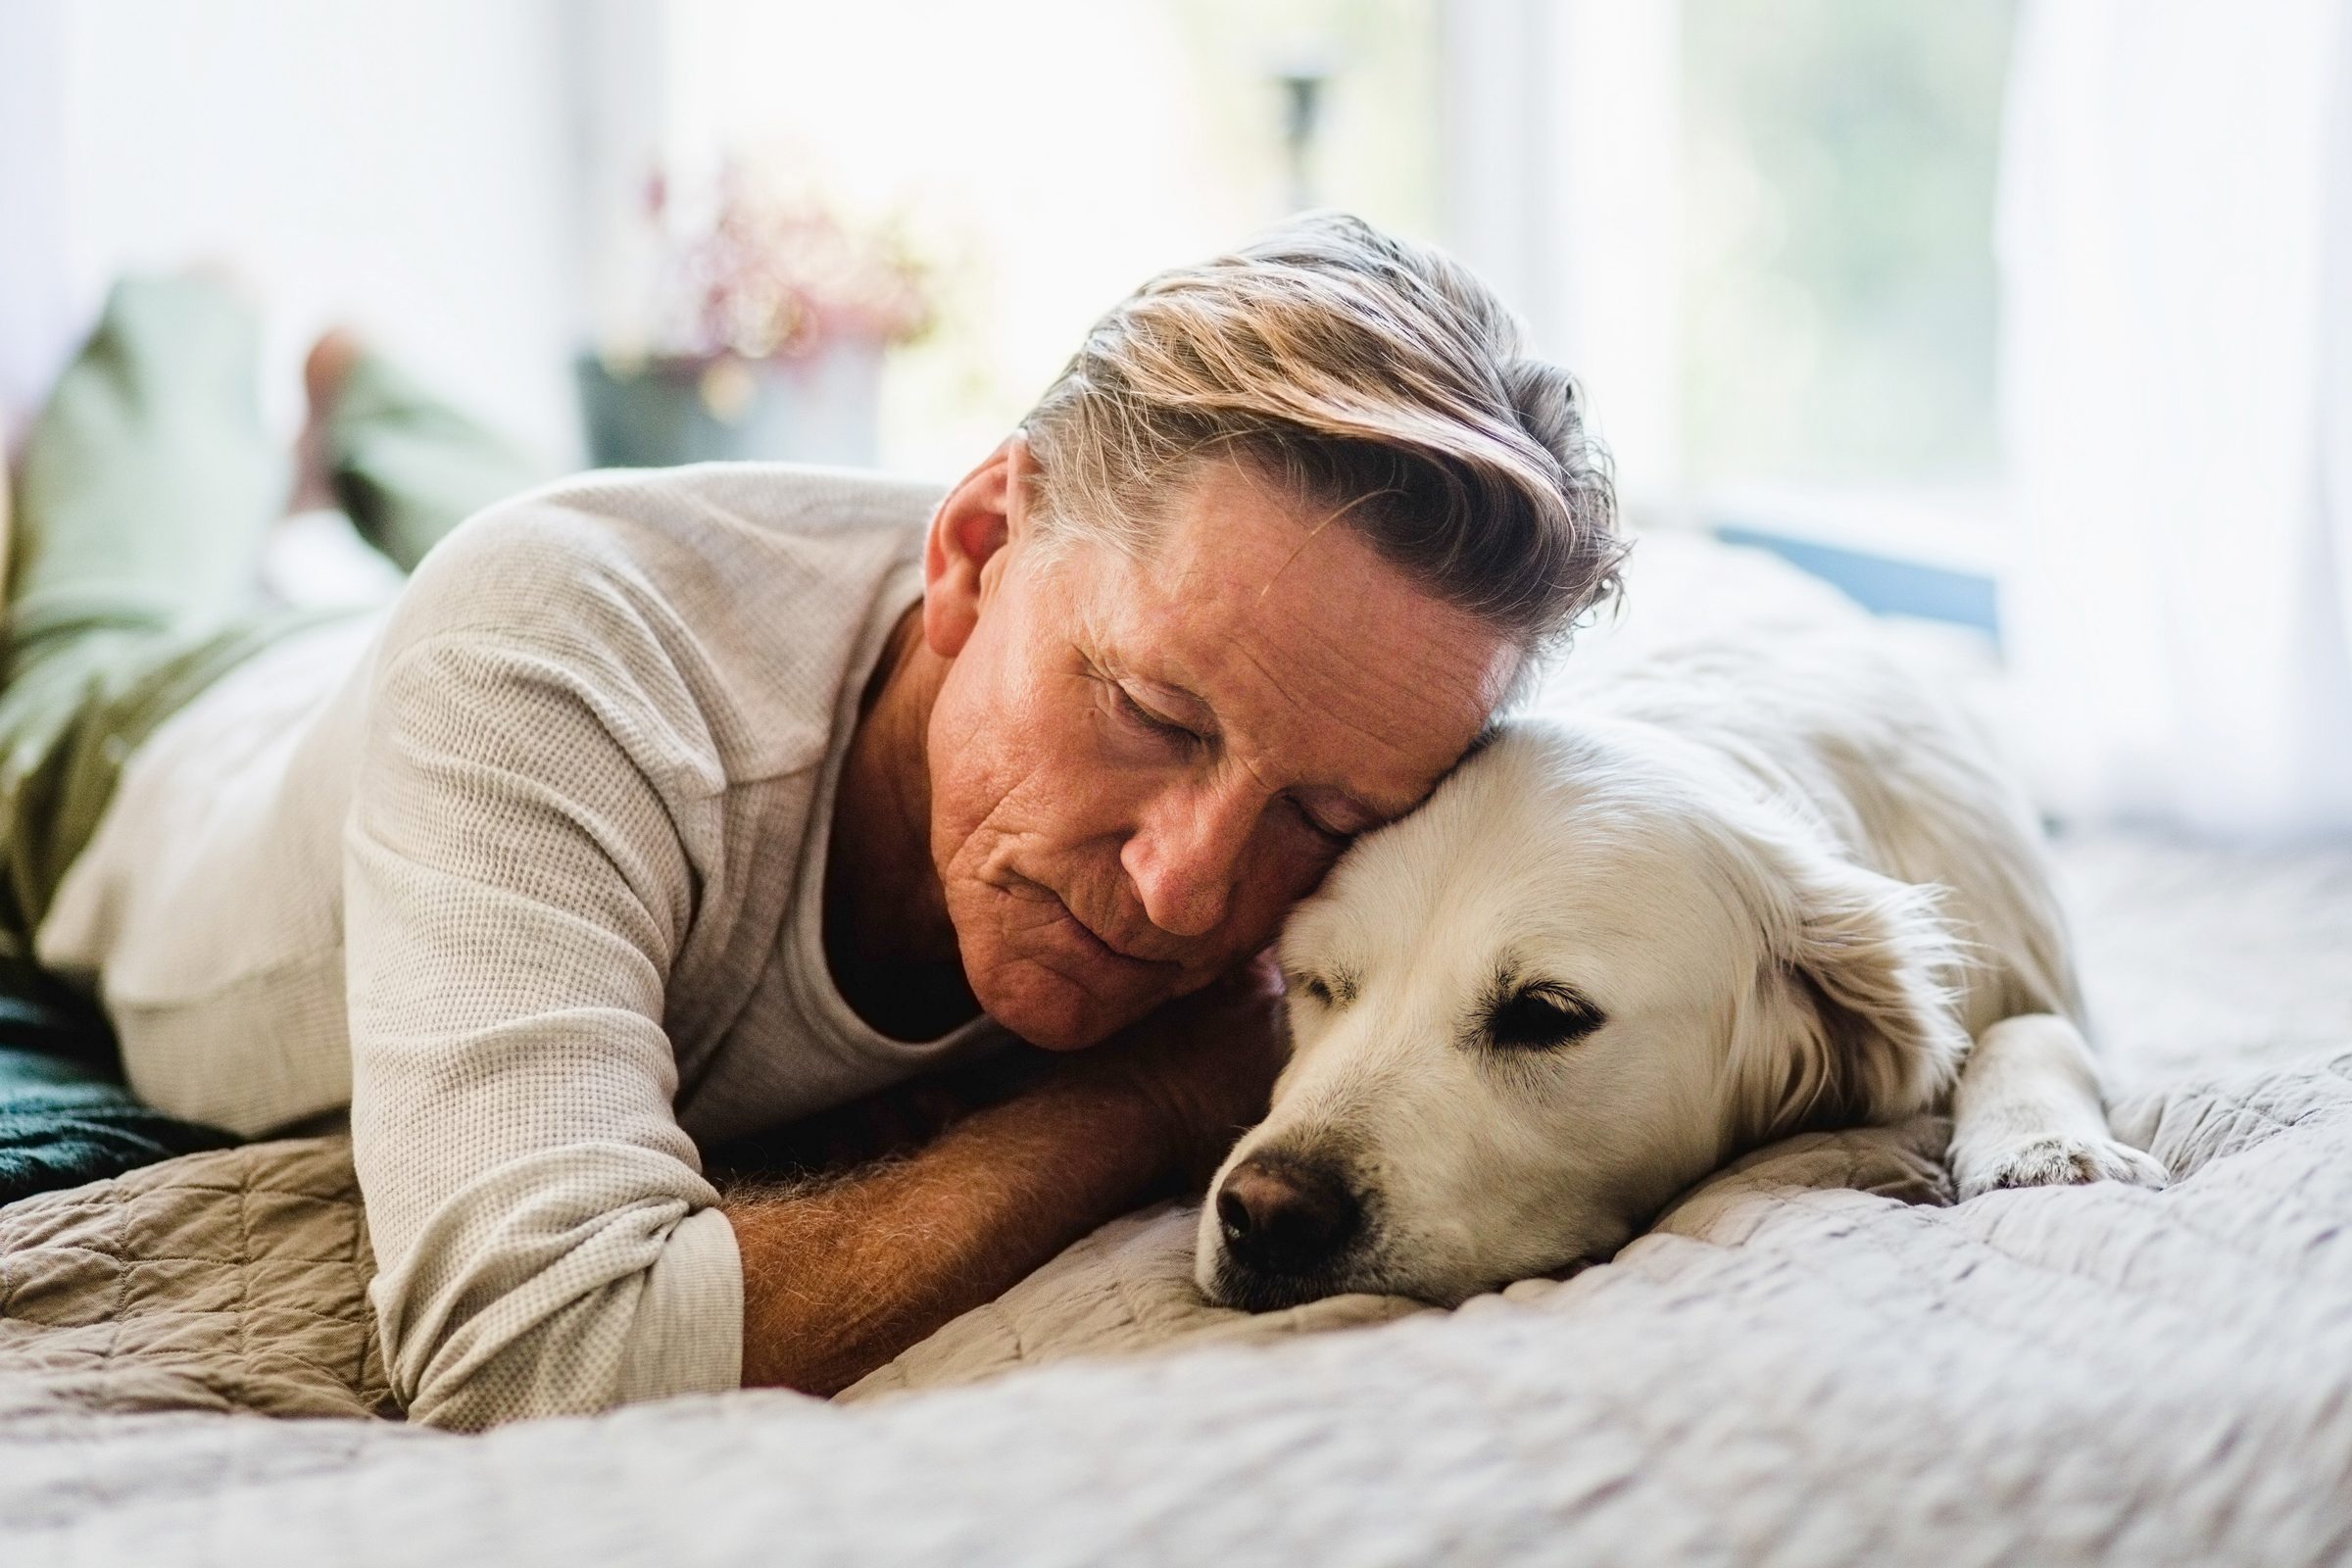 New Study: This Behavior Could Be a Sign of Dementia in Your Dog